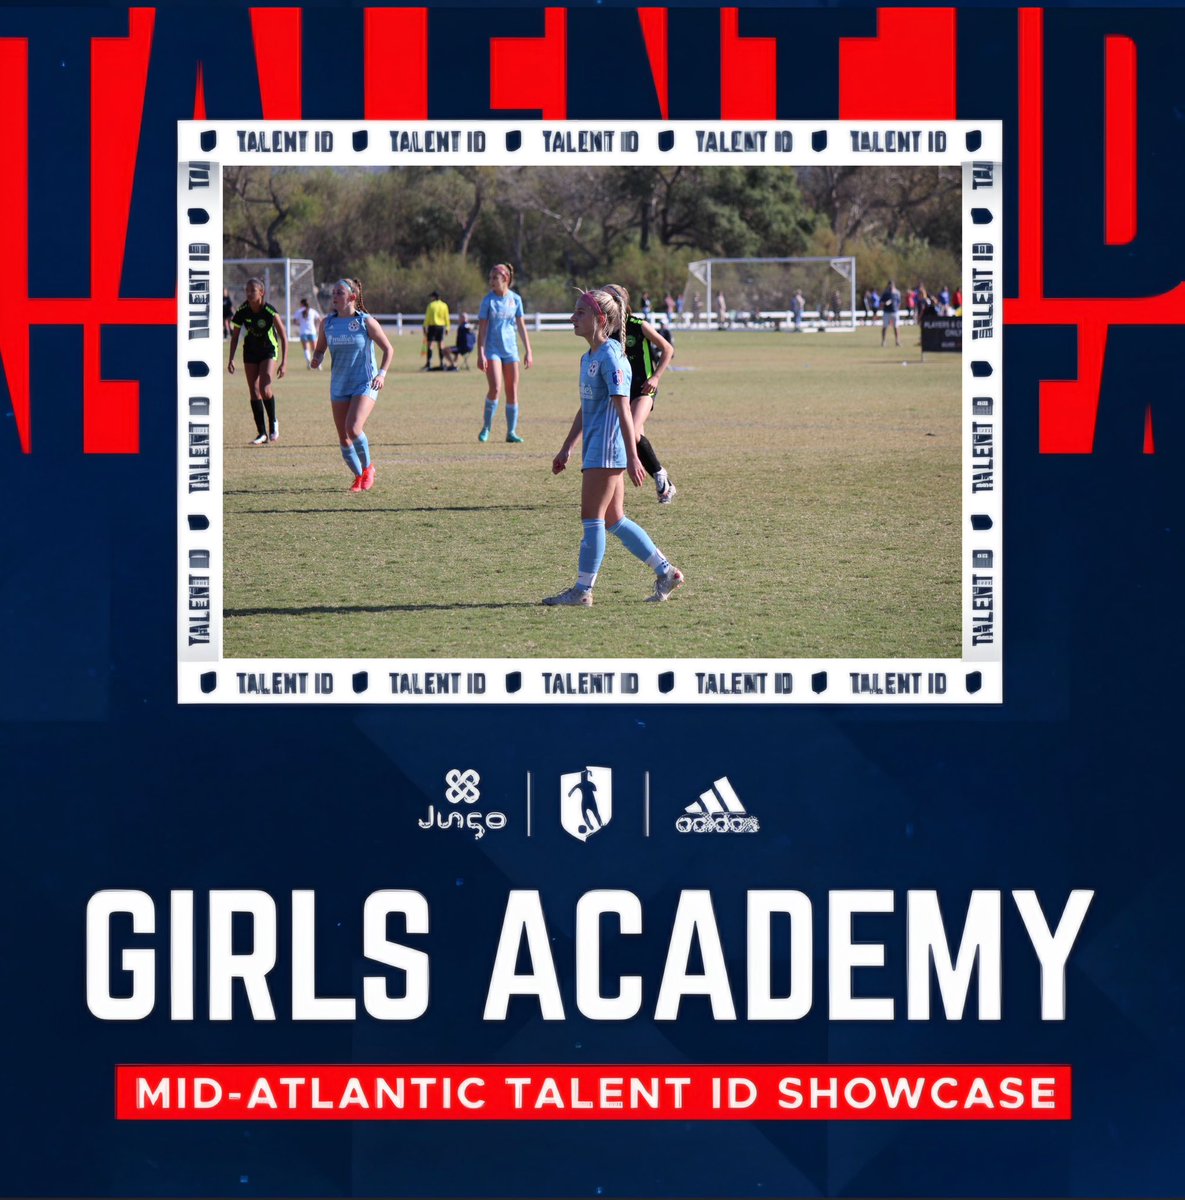 Thank you @GAcademyLeague for another invite to the Mid-Atlantic Talent ID!!! I’m excited and honored to compete with the best along with my other teammates!!

 @GAcademyLeague @Beadling2009GA @BeadlingSoccer @PrepSoccer @TopDrawerSoccer @TheSoccerWire @ImYouthSoccer  ⬇️⬇️